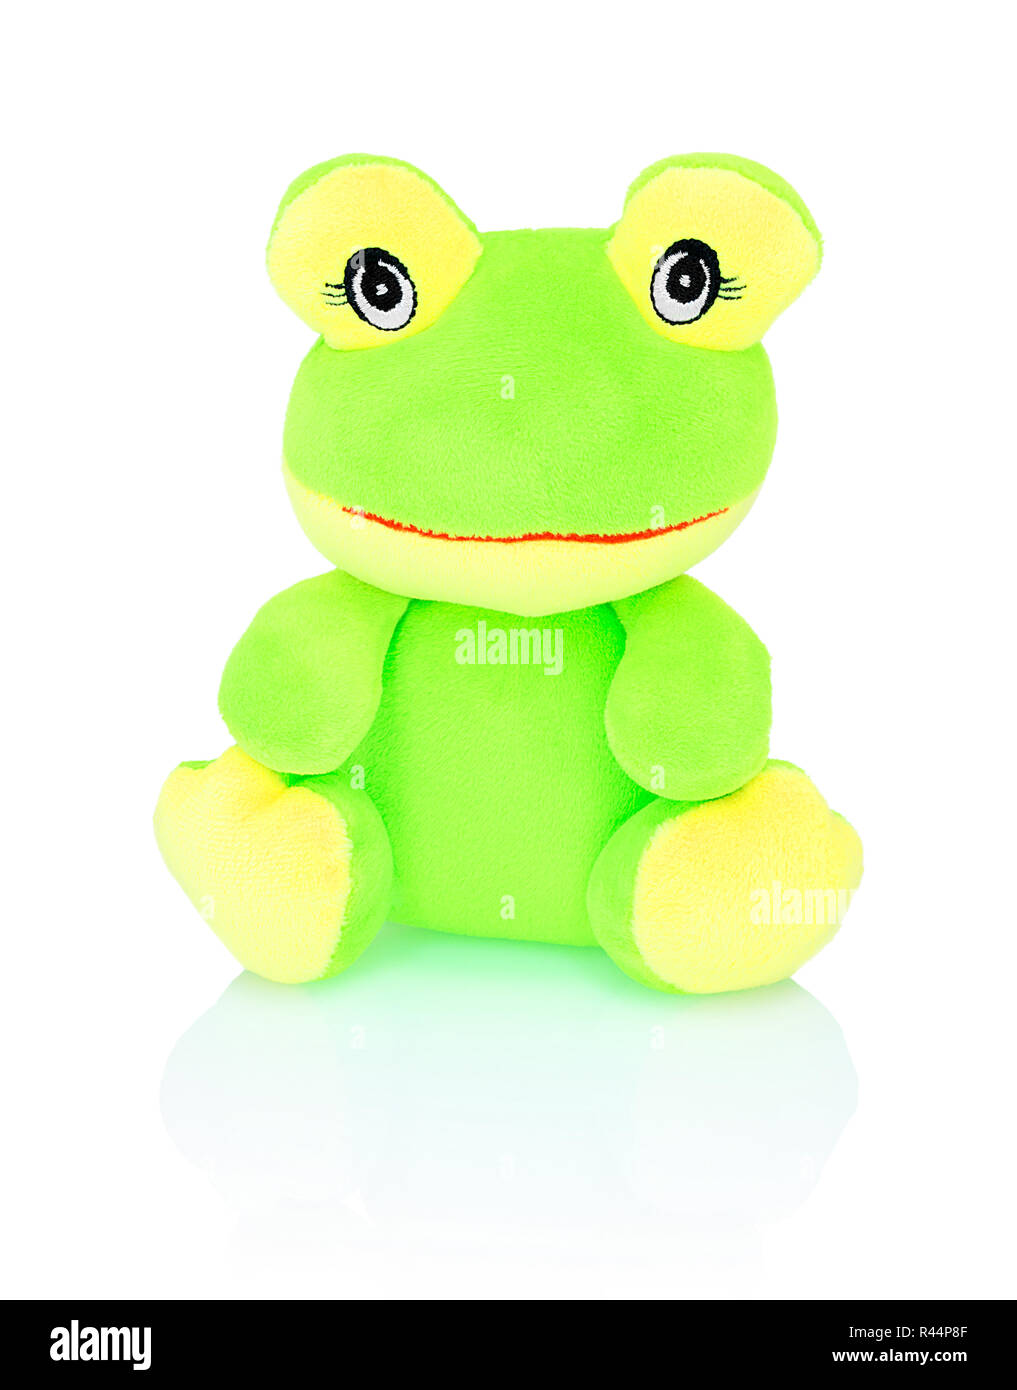 https://c8.alamy.com/comp/R44P8F/neon-green-frog-plushie-toy-isolated-on-white-background-with-shadow-reflection-chartreuse-frog-doll-isolated-on-white-underlay-plush-stuffed-puppet-R44P8F.jpg